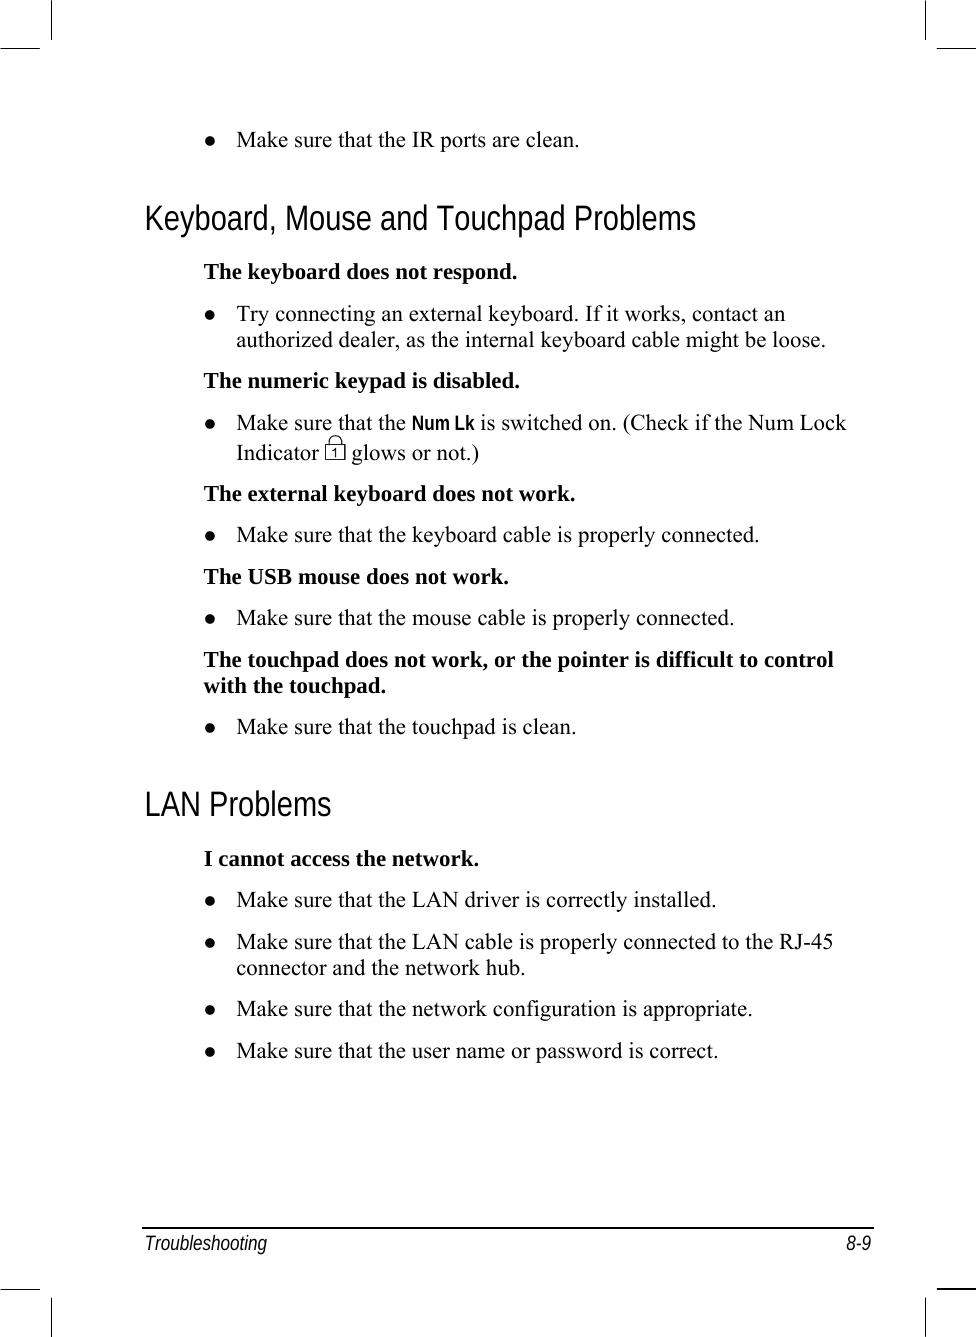  Troubleshooting 8-9   Make sure that the IR ports are clean. Keyboard, Mouse and Touchpad Problems The keyboard does not respond.   Try connecting an external keyboard. If it works, contact an authorized dealer, as the internal keyboard cable might be loose. The numeric keypad is disabled.   Make sure that the Num Lk is switched on. (Check if the Num Lock Indicator   glows or not.) The external keyboard does not work.   Make sure that the keyboard cable is properly connected. The USB mouse does not work.   Make sure that the mouse cable is properly connected. The touchpad does not work, or the pointer is difficult to control with the touchpad.   Make sure that the touchpad is clean. LAN Problems I cannot access the network.   Make sure that the LAN driver is correctly installed.   Make sure that the LAN cable is properly connected to the RJ-45 connector and the network hub.   Make sure that the network configuration is appropriate.   Make sure that the user name or password is correct. 